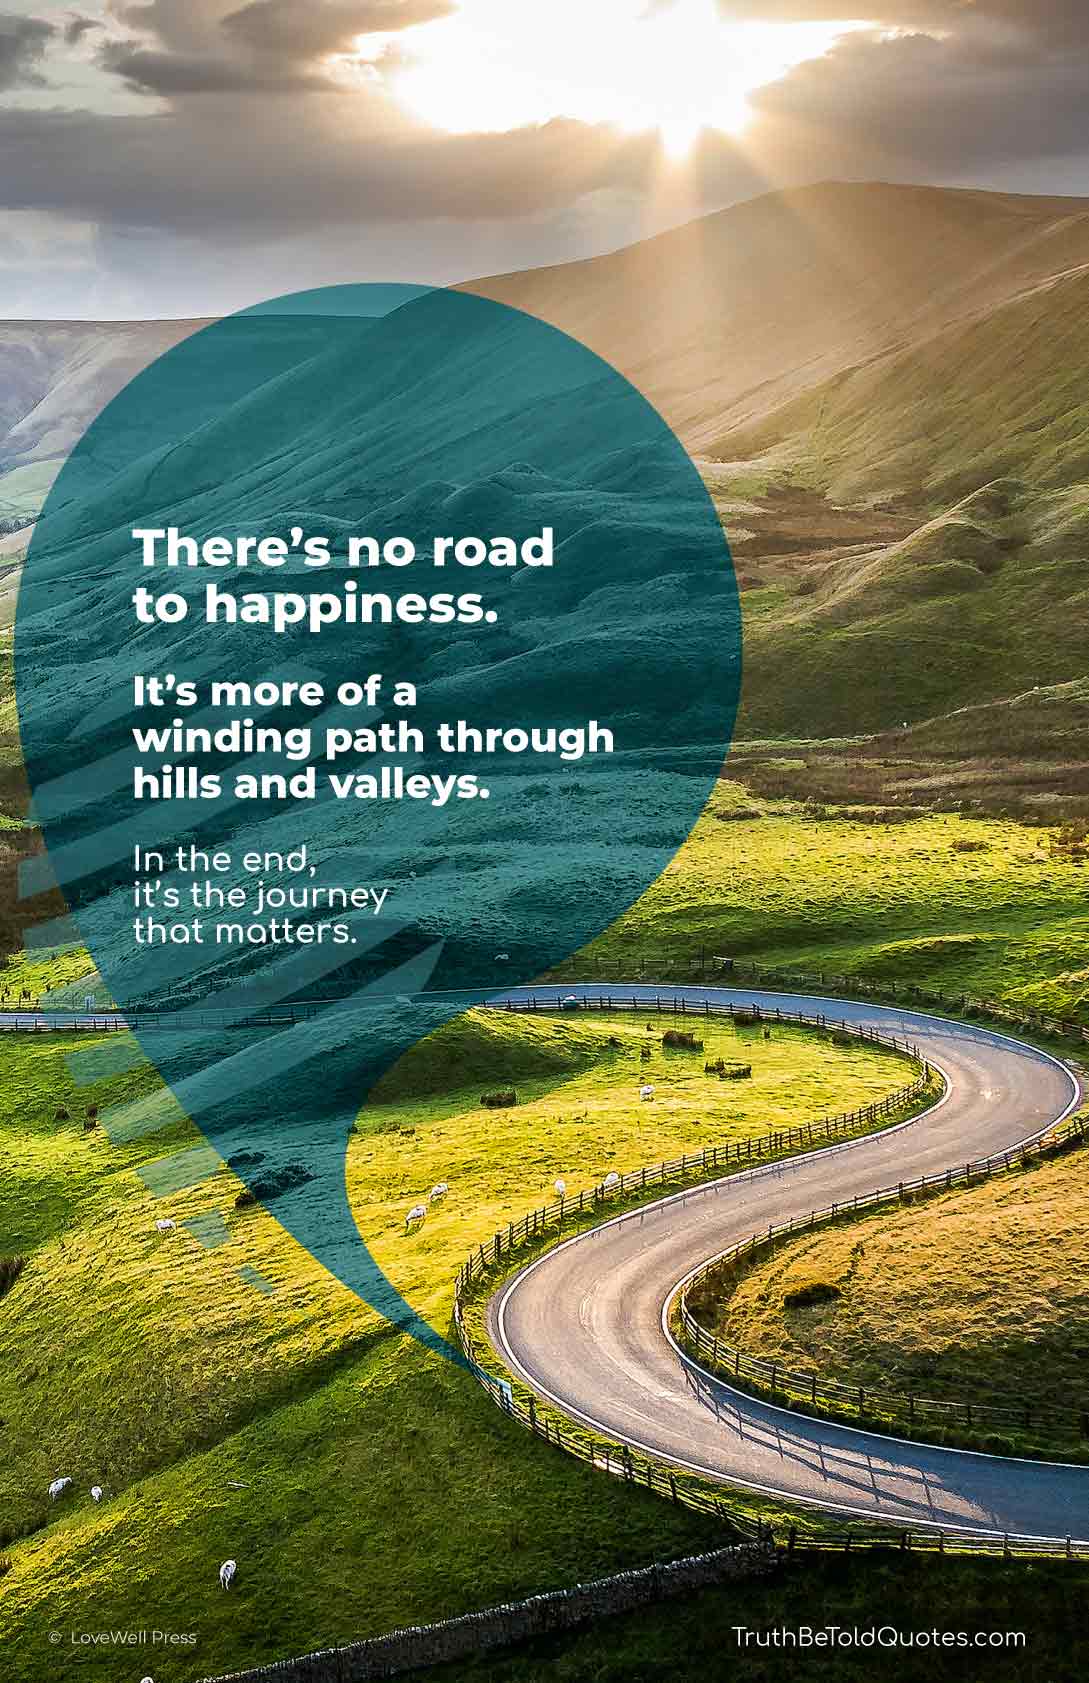 Quote for teens - 'There's no road to happiness. It's more a winding path through hills and valleys...''